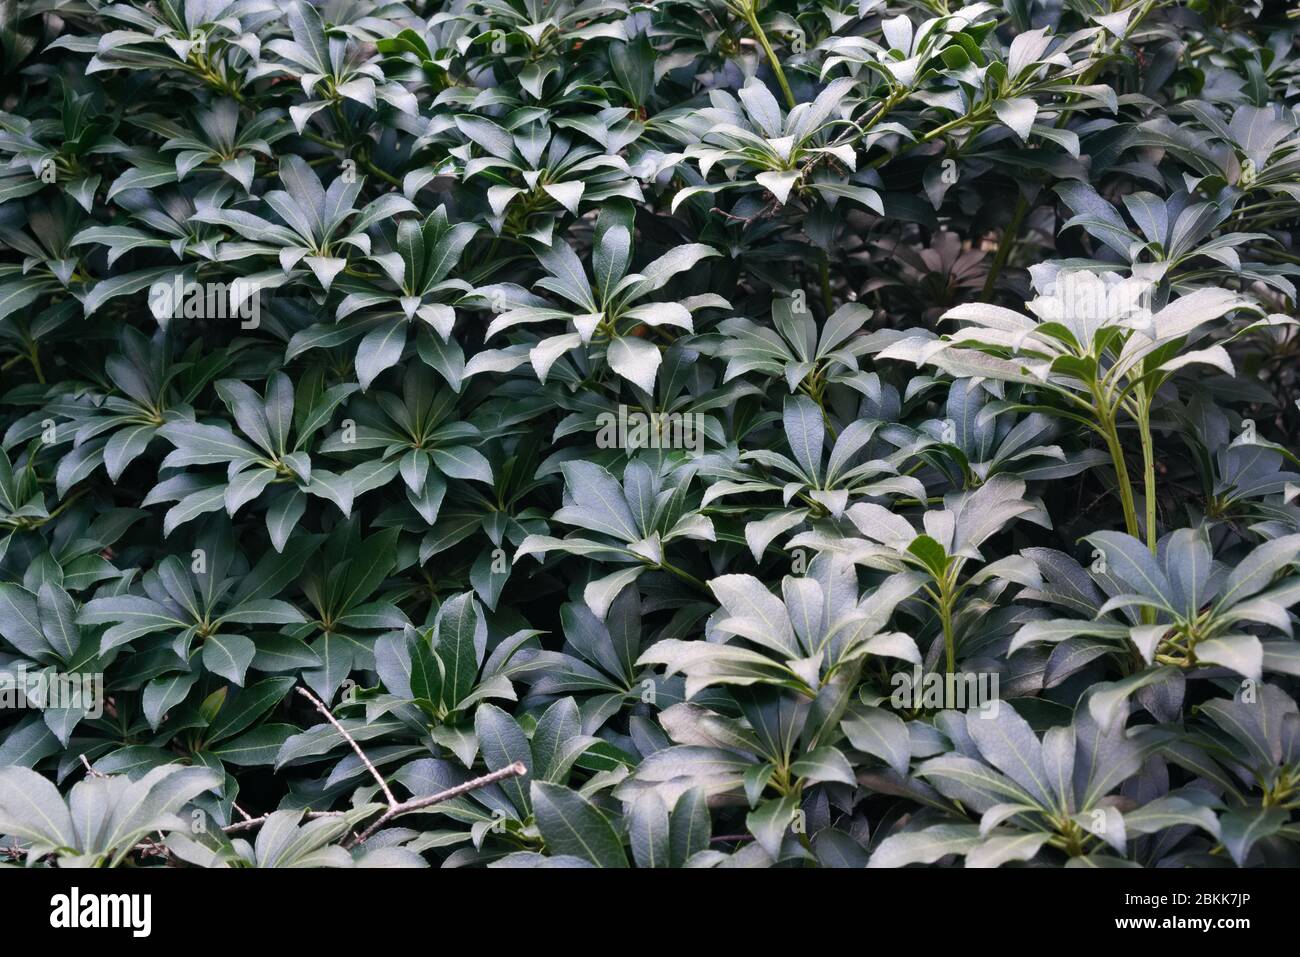 Pieris japonica 'Cavatine' shrub in late spring with no flowers, dark green floral background Stock Photo